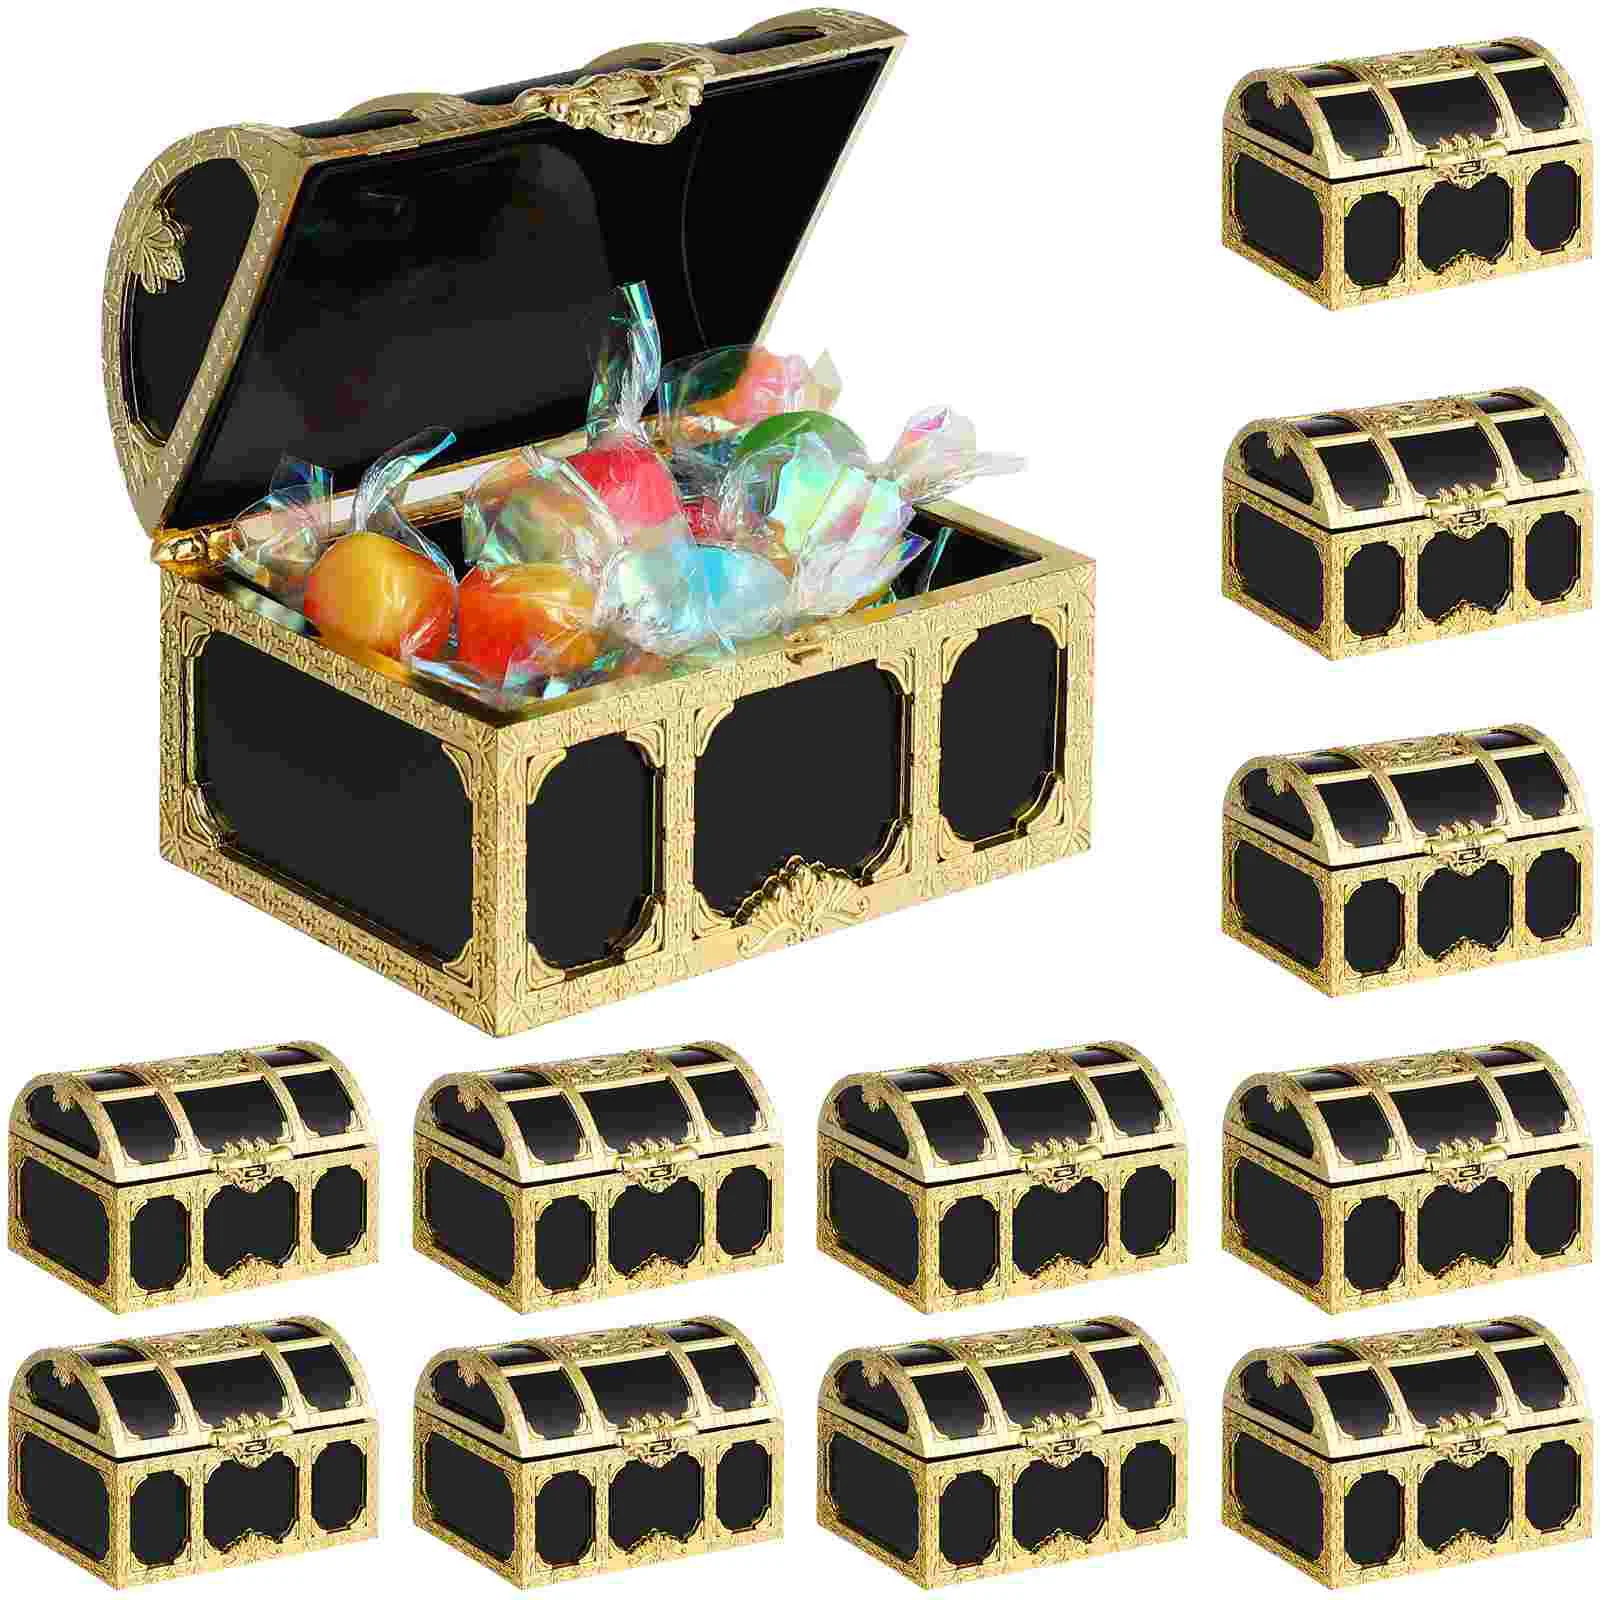 

Treasure Pirate Box Boxes Storage Mini Kids Toy Candy Plastic Vintage Party Favor Treat Jewelry Favors Case Classroom Keepsake